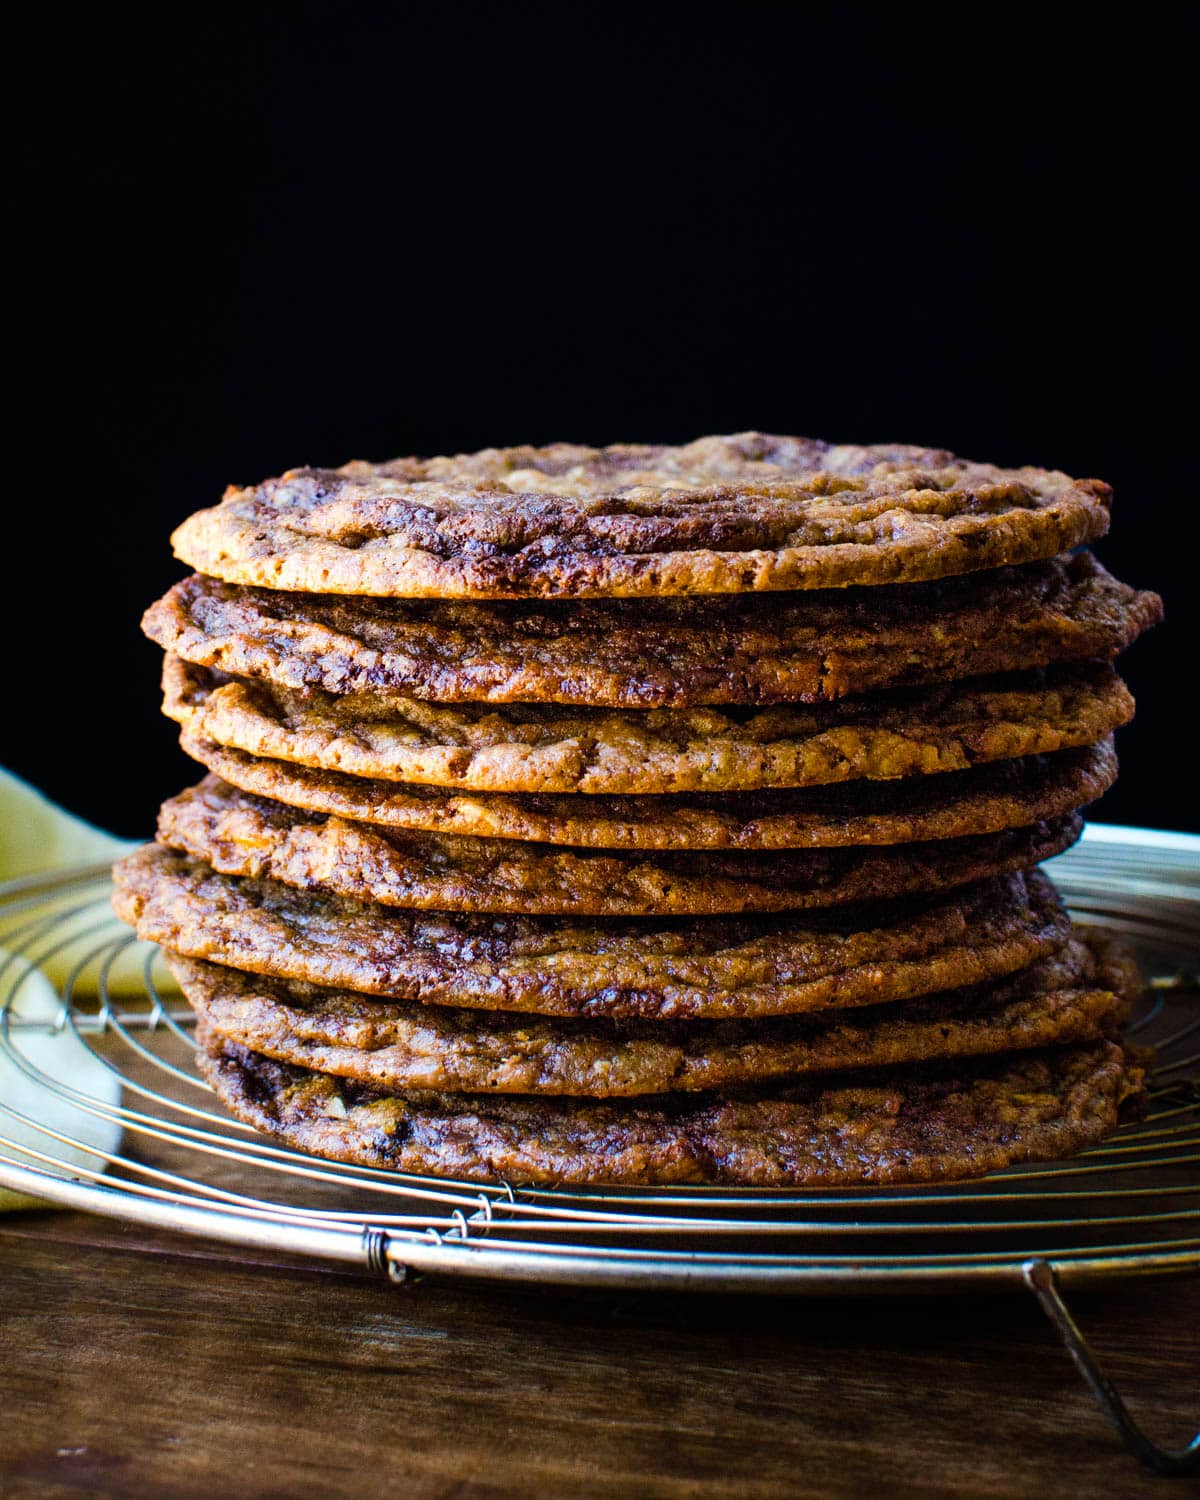 A stack of cookies to show how thin they are.